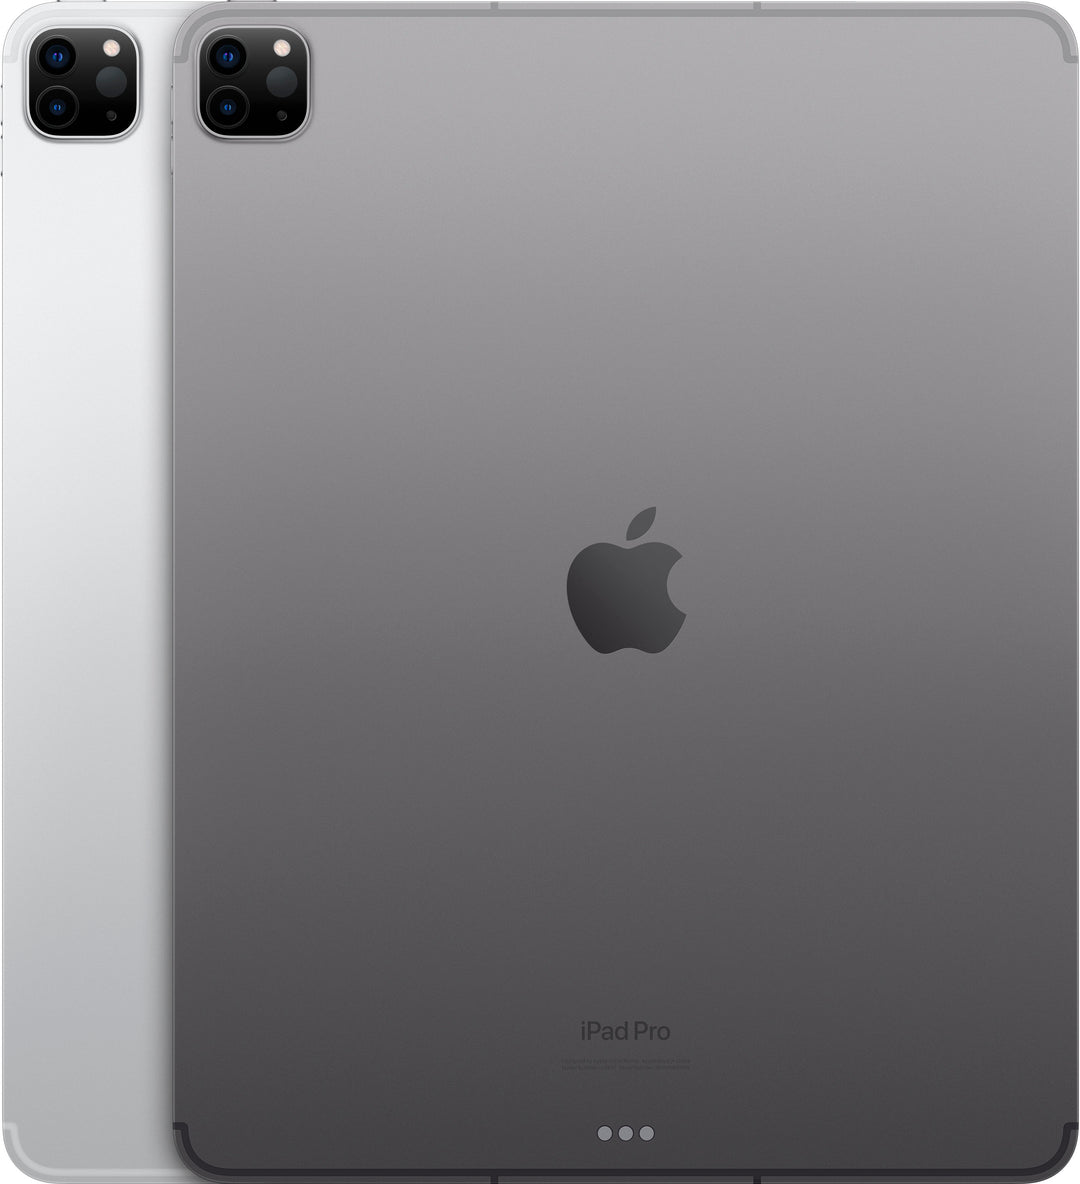 Apple - 12.9-Inch iPad Pro (Latest Model) with Wi-Fi + Cellular - 256GB - Space Gray (Unlocked)_4